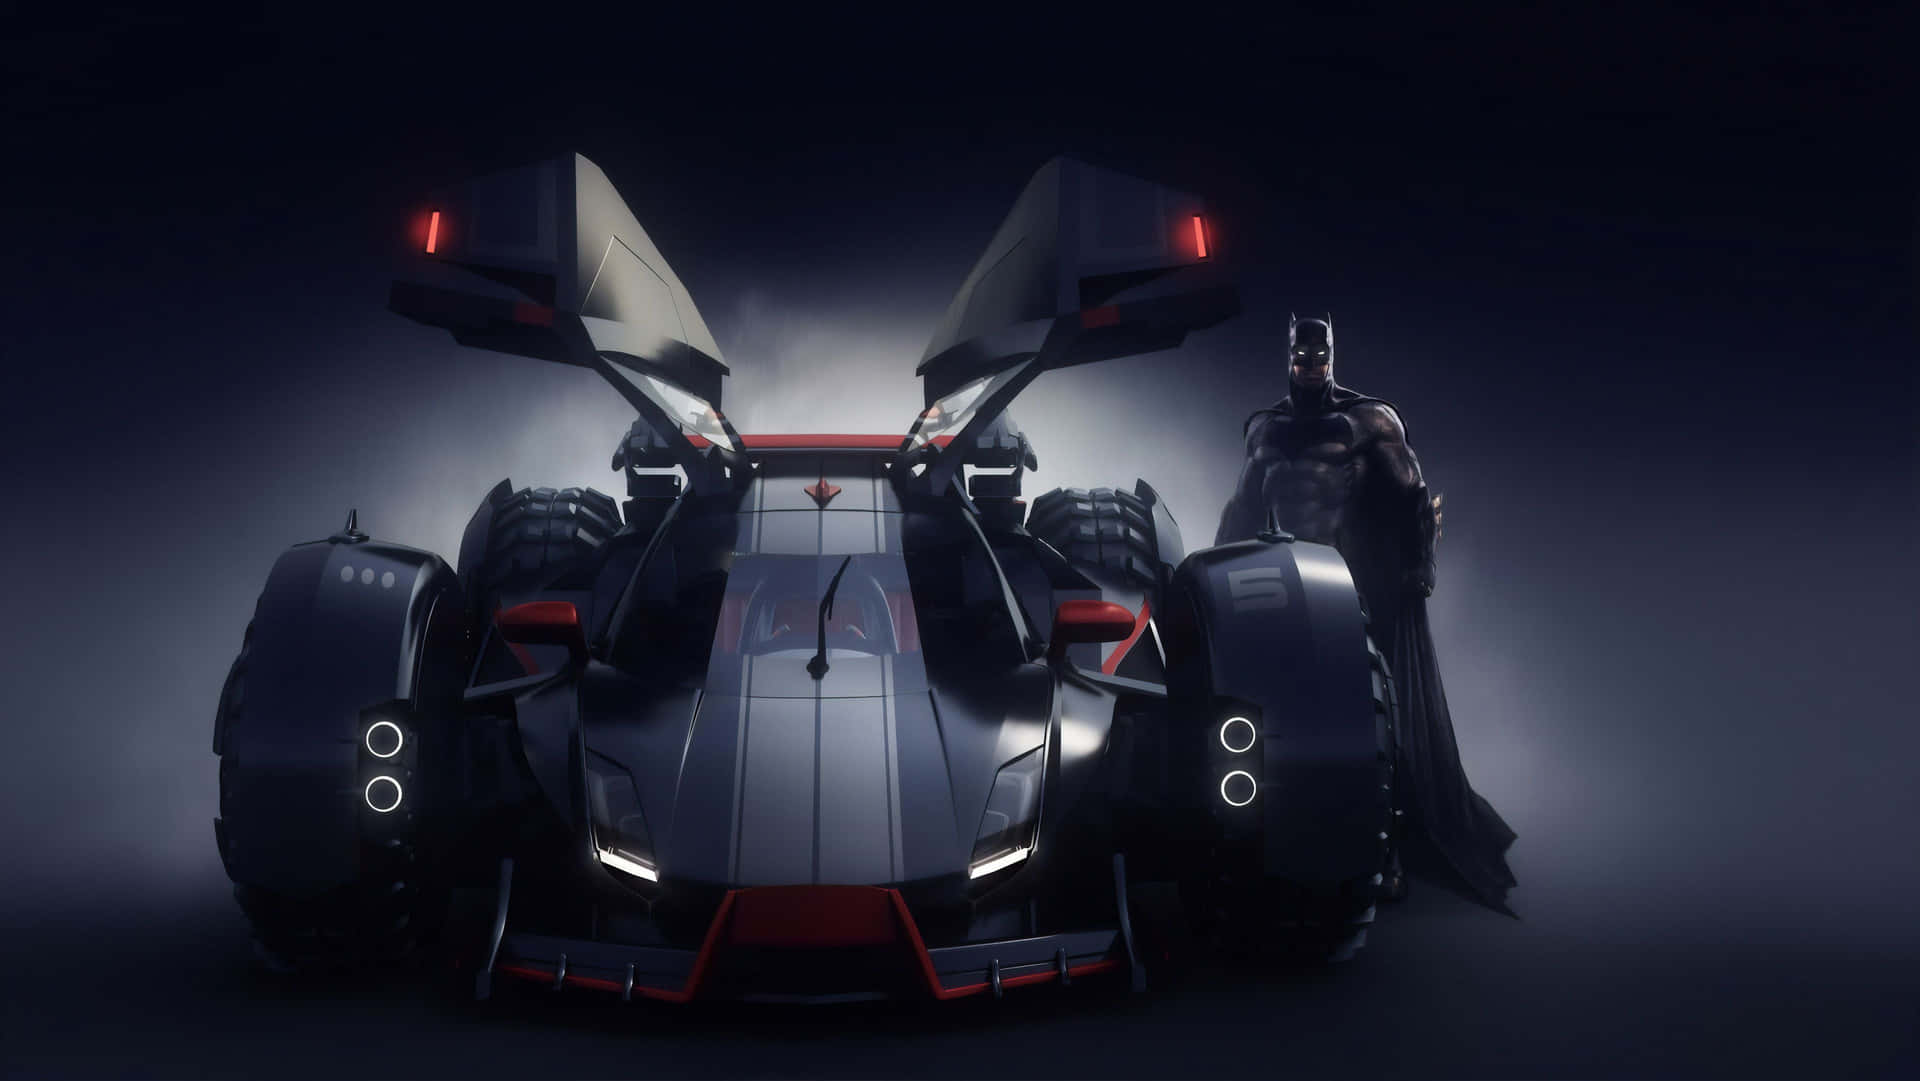 Get Ready for Action with the 4K Batmobile